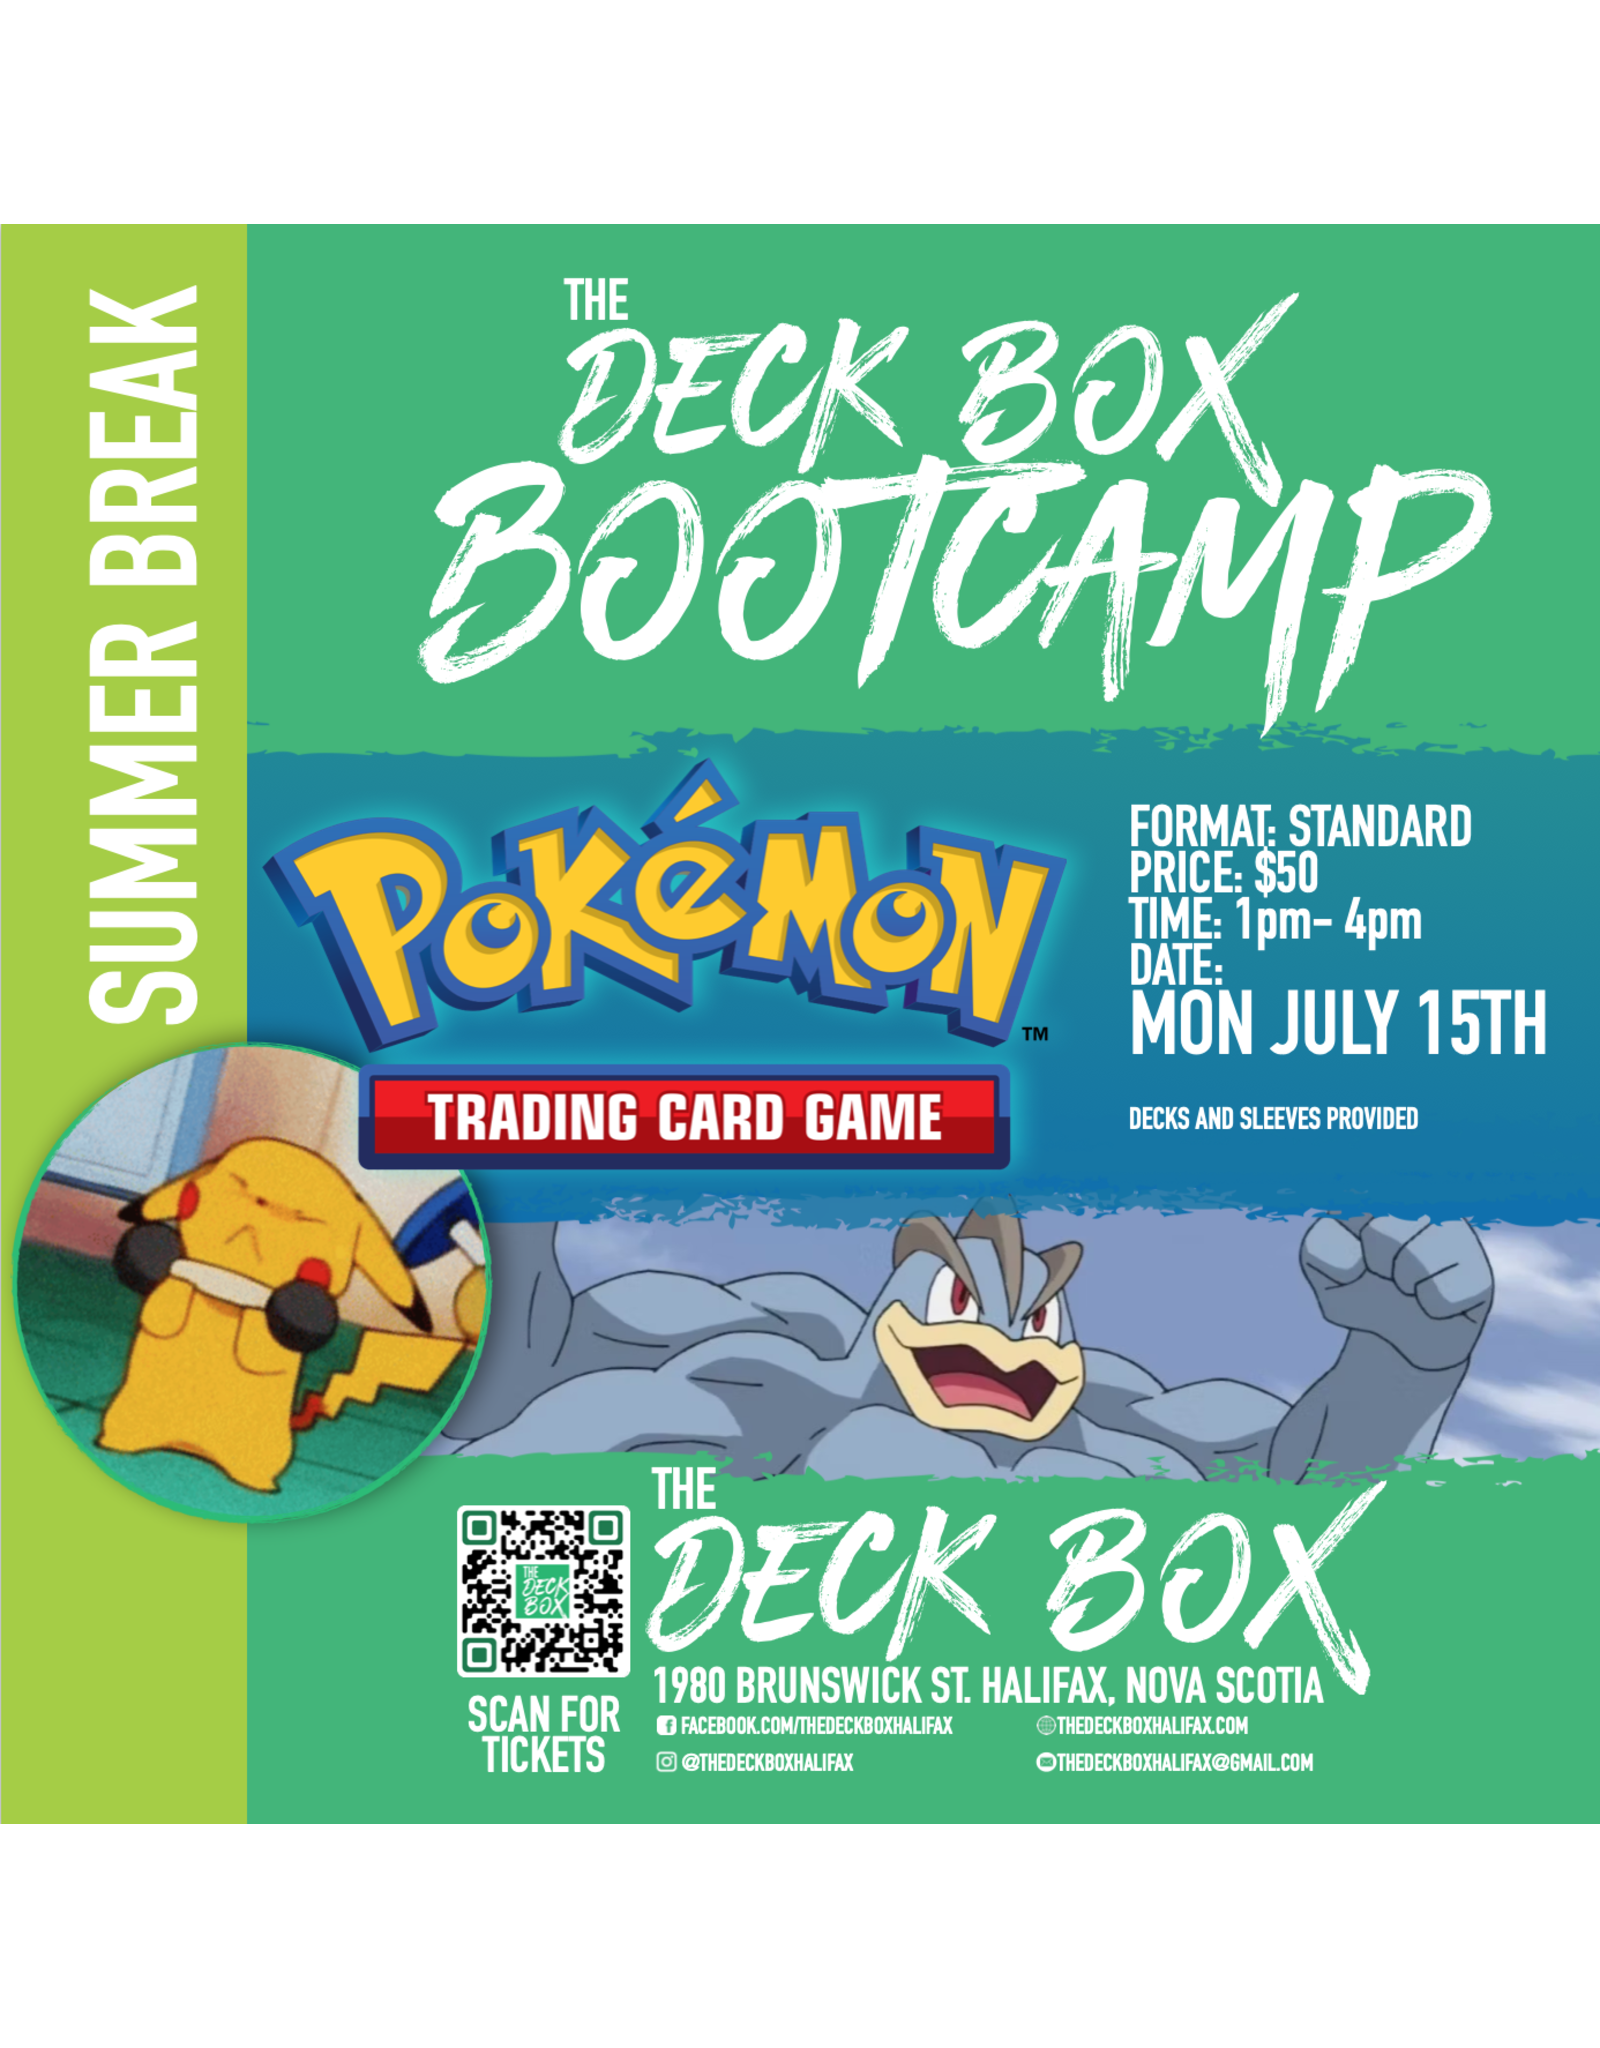 Events Summer Break Pokemon TCG Day  (Monday July 15th -  1pm - 4pm) Week 3 Bootcamp